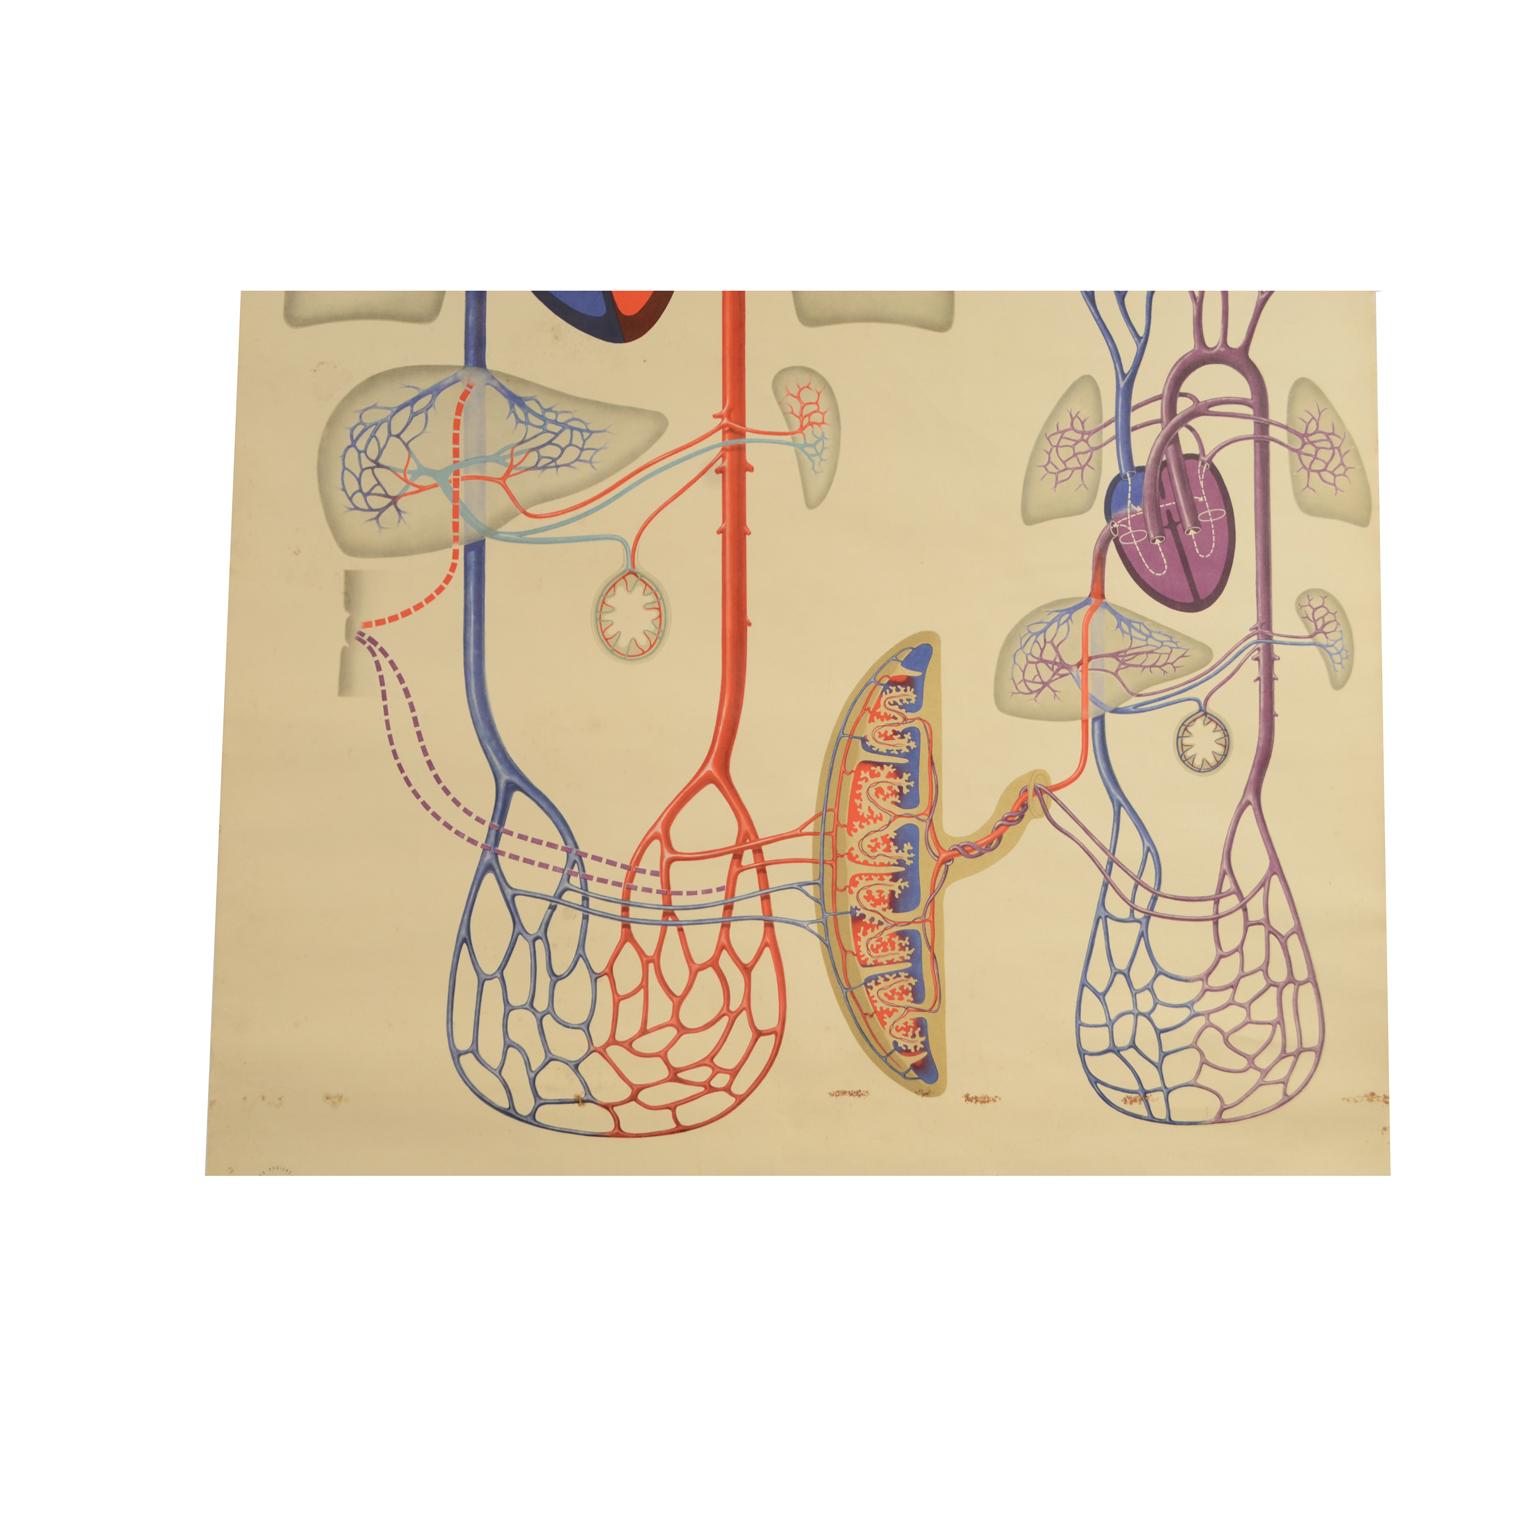 Anatomical didactic plate depicting the circulatory system, from the 1930s, by the Deutsches Hygiene- Museum in Dresden. Good condition some damage. Measures: 81 x 117 cm - 31.8 x 46 inches.